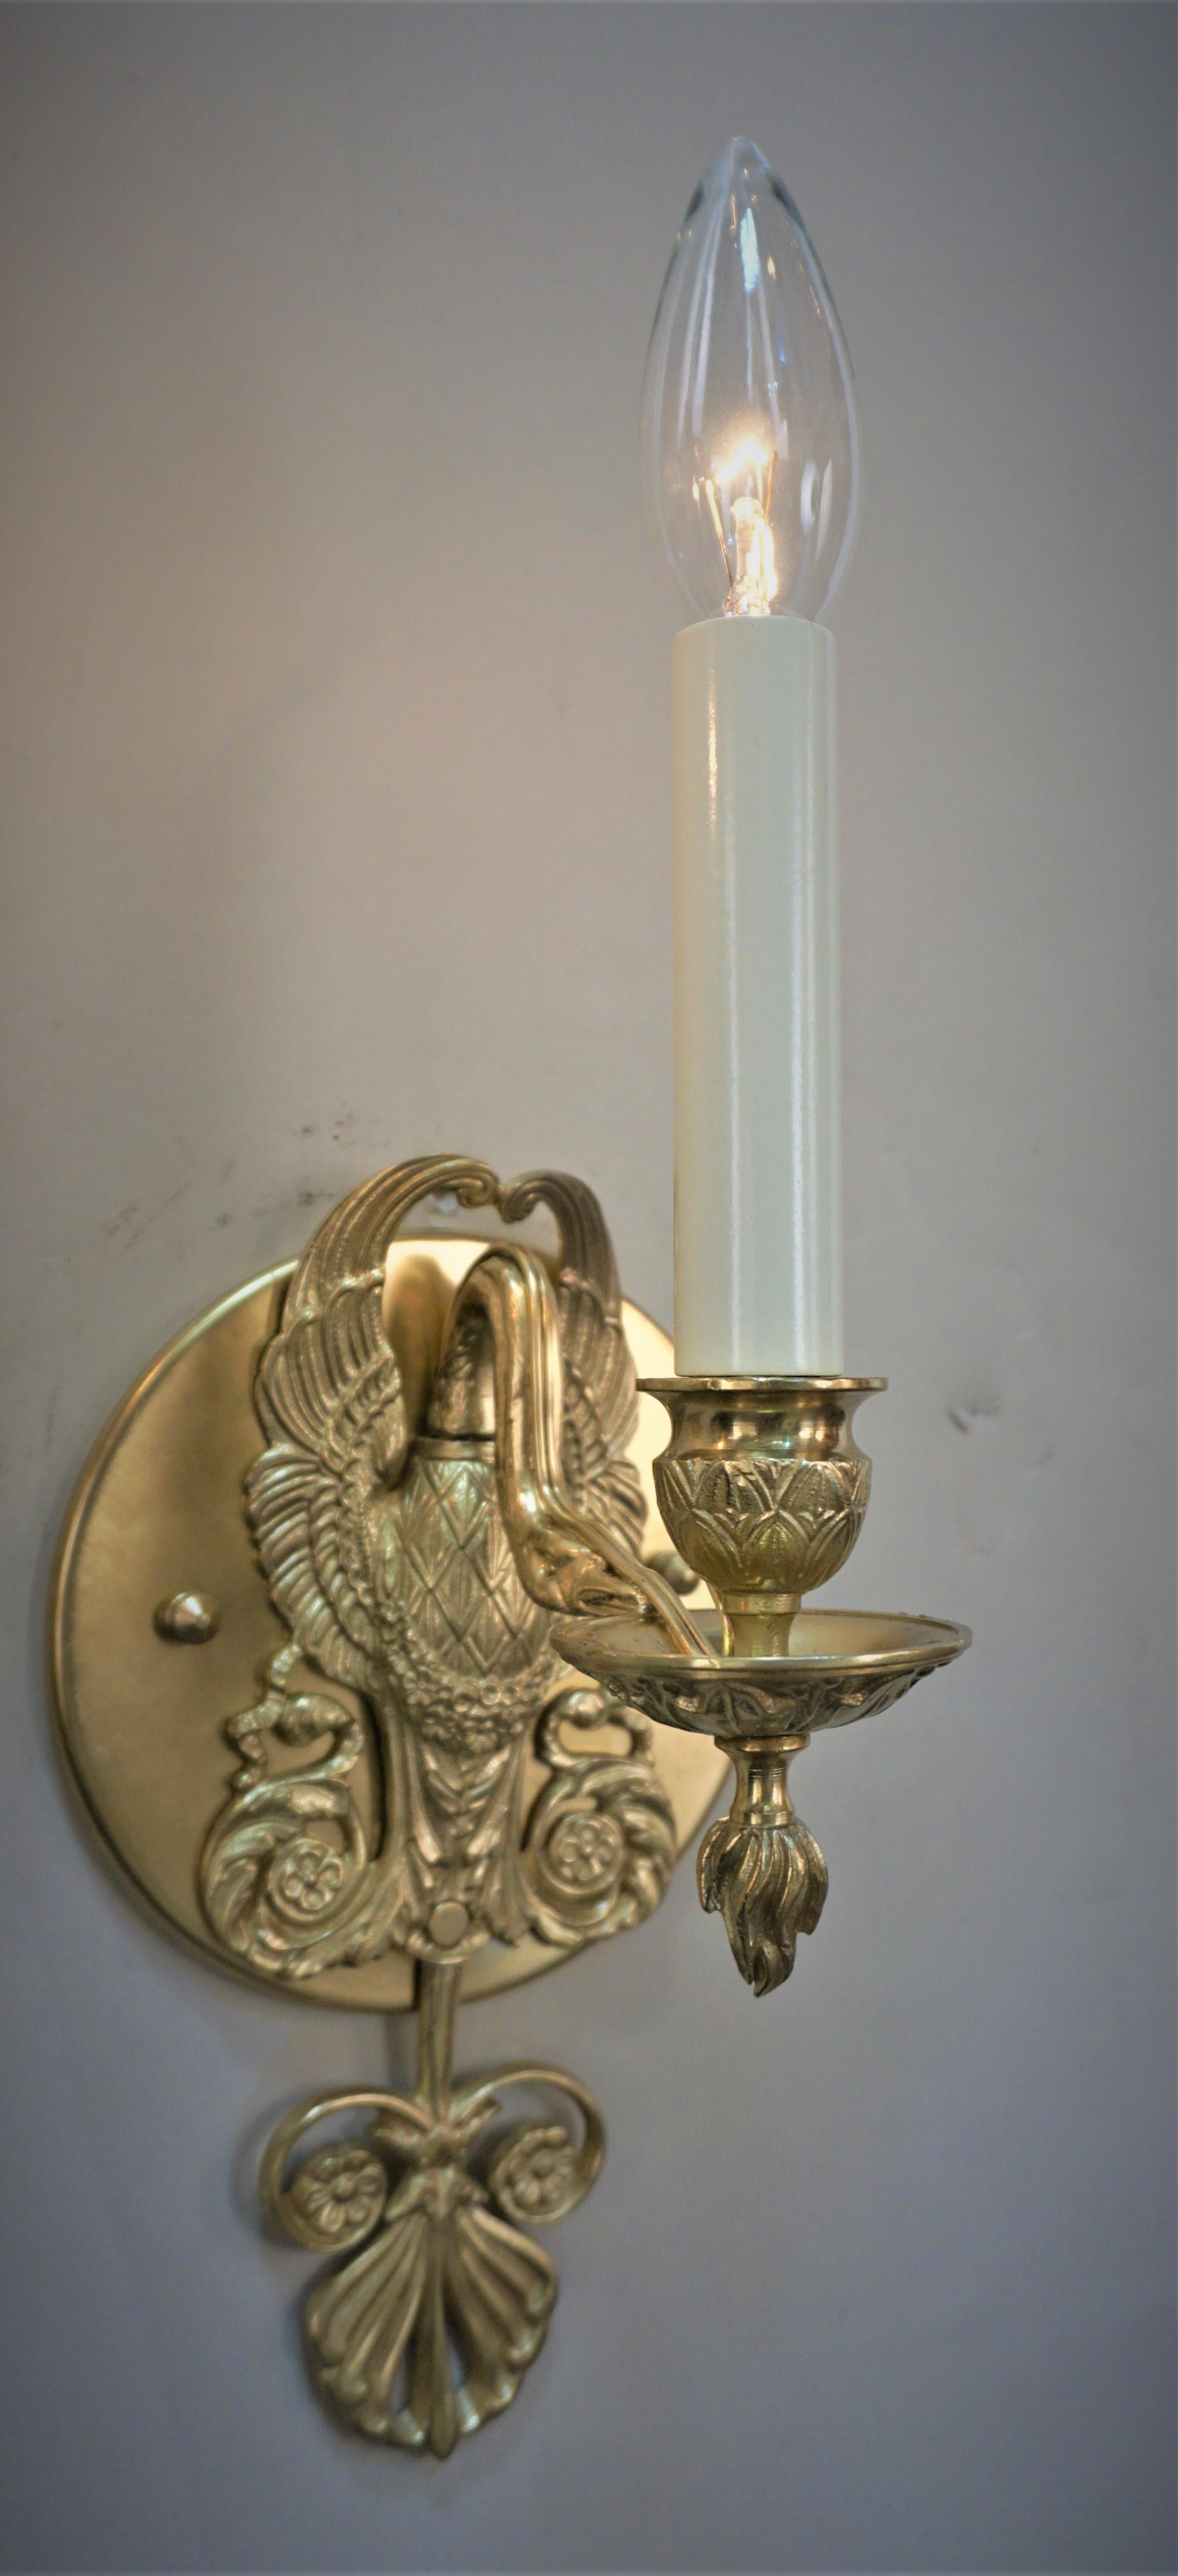 Pair of bronze swan shape Empire style bronze wall sconces.
75 watts max.